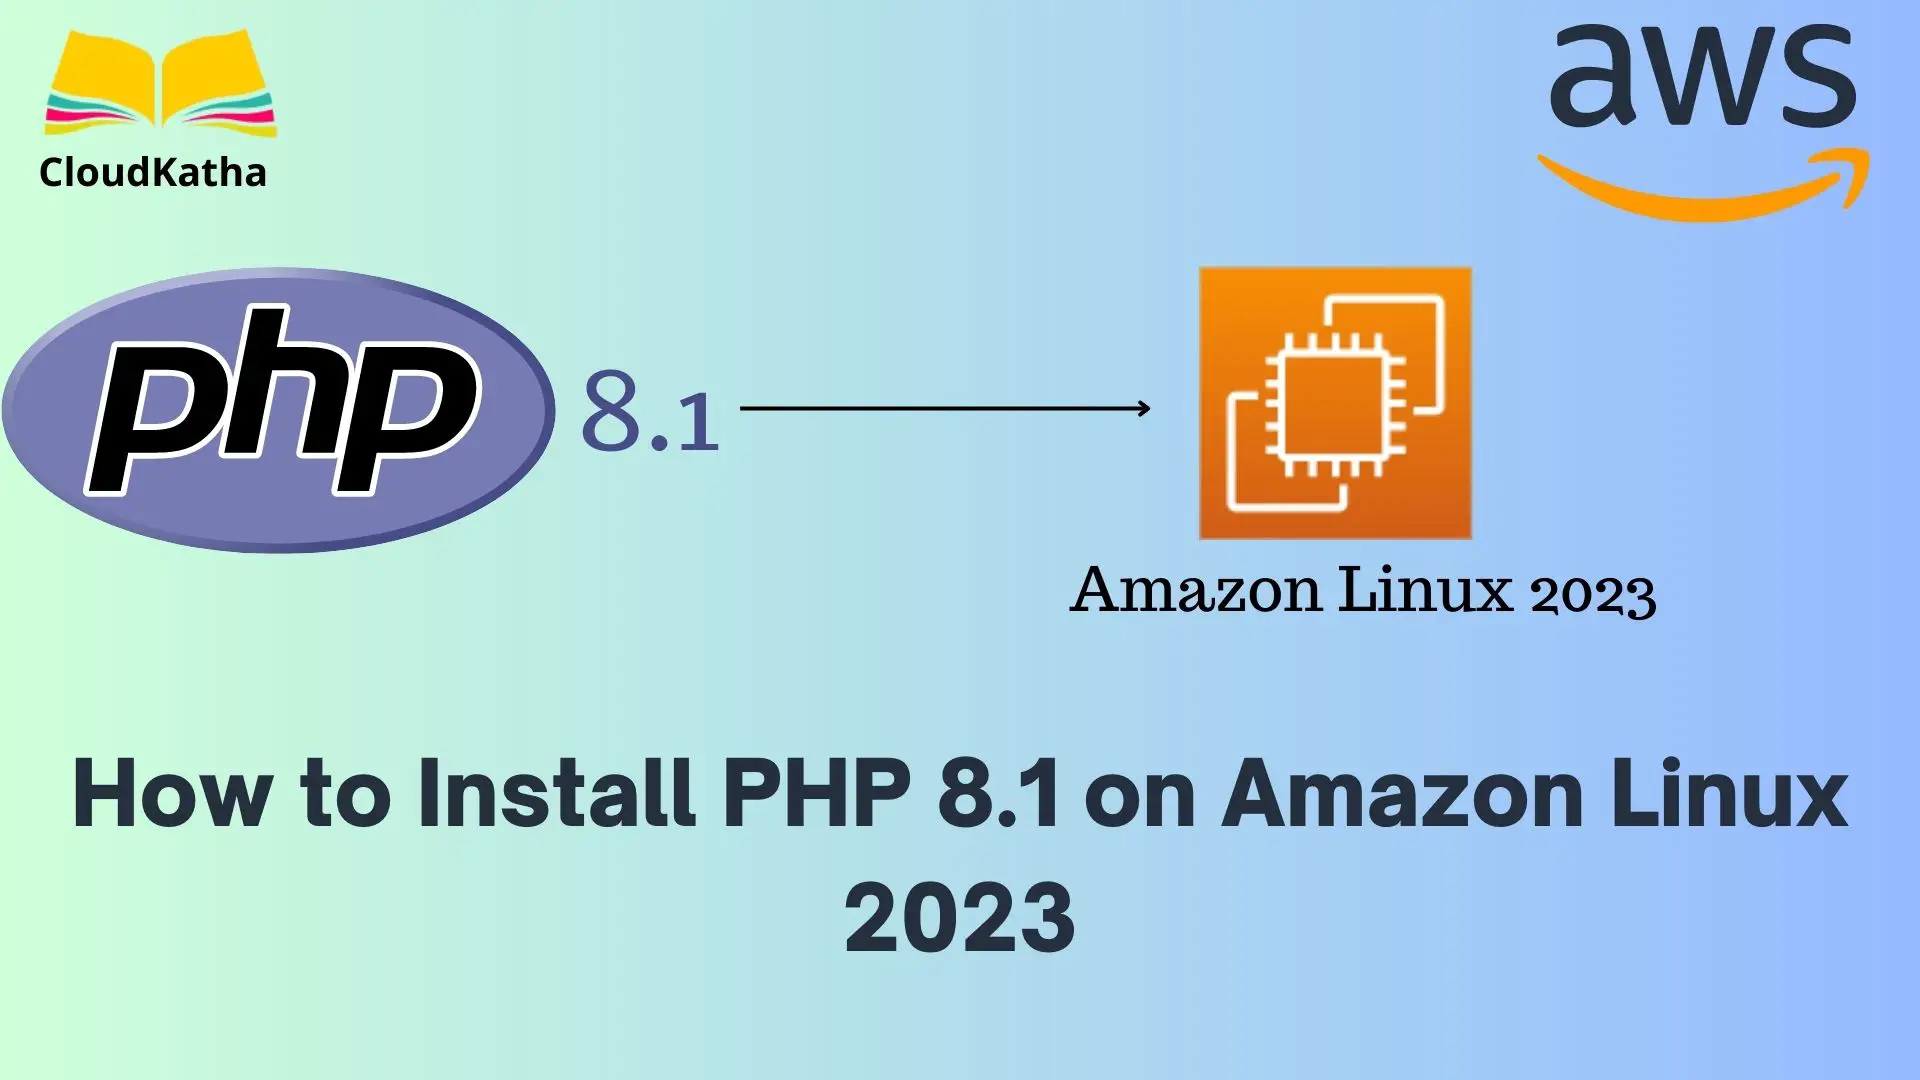 How to Install PHP 8.1 on Amazon Linux 2023